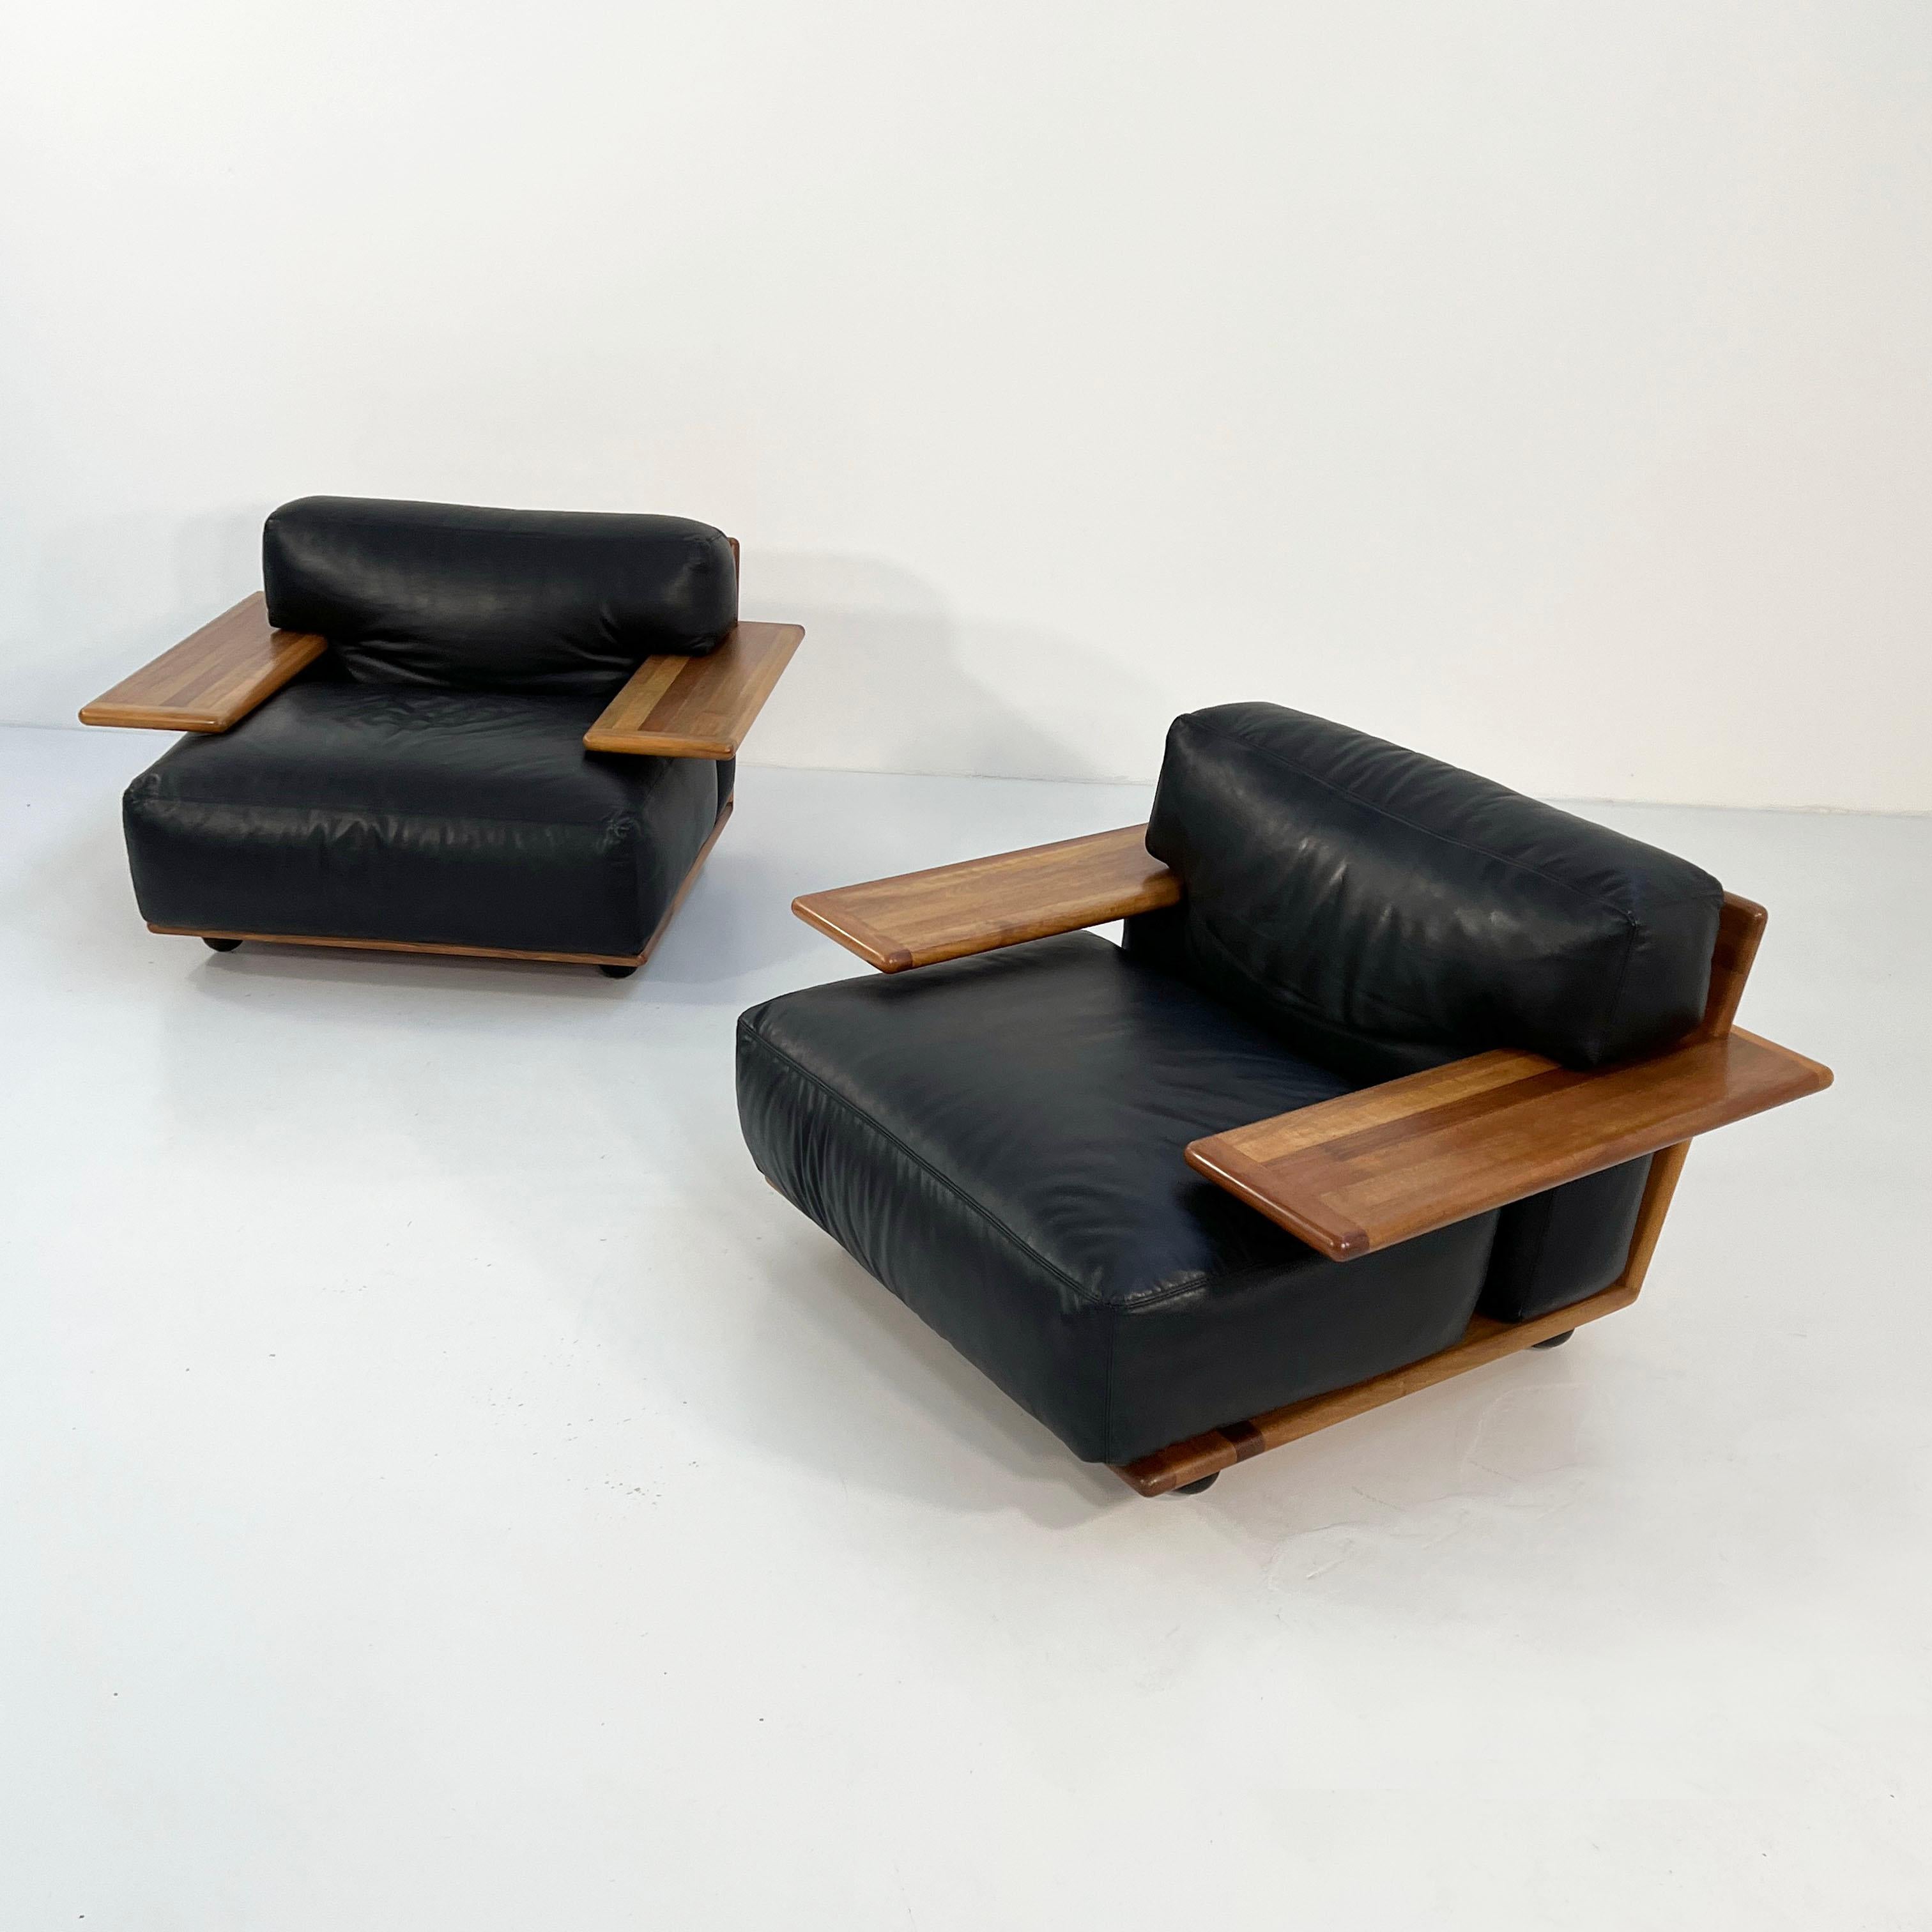 Late 20th Century Pianura Armchair in Black Leather by Mario Bellini for Cassina, 1970s For Sale